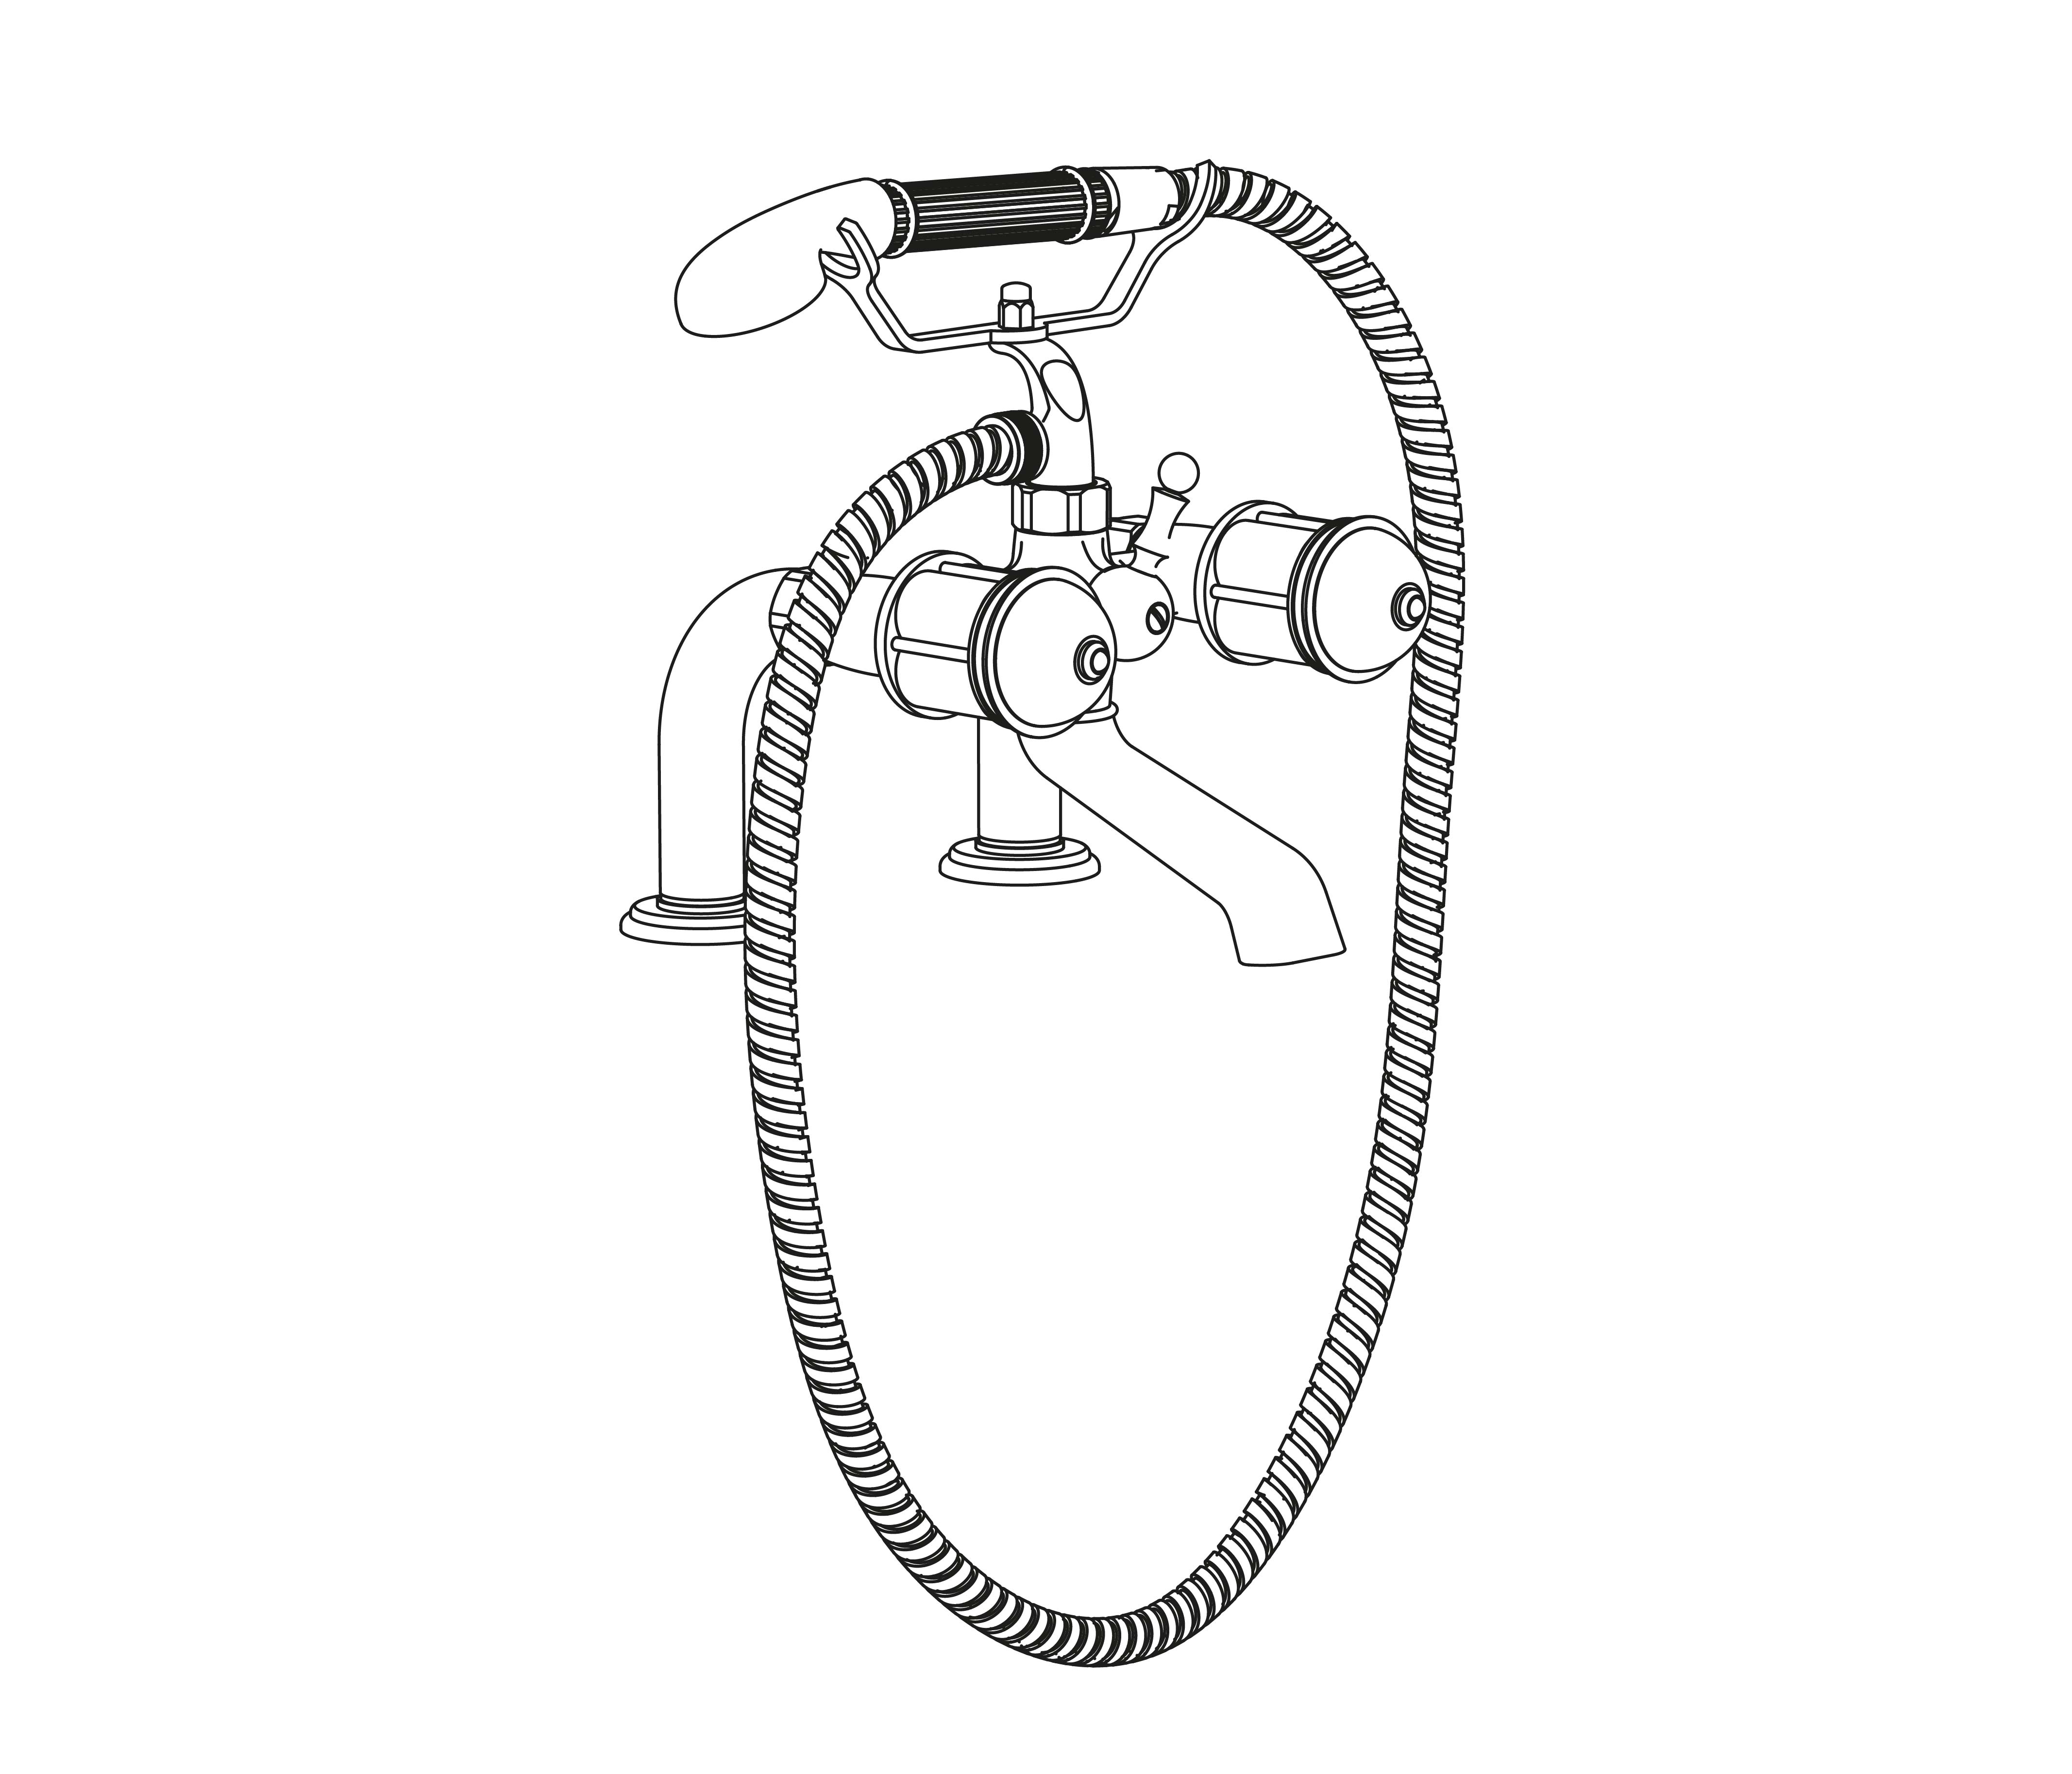 S179-3306 Rim mounted bath and shower mixer